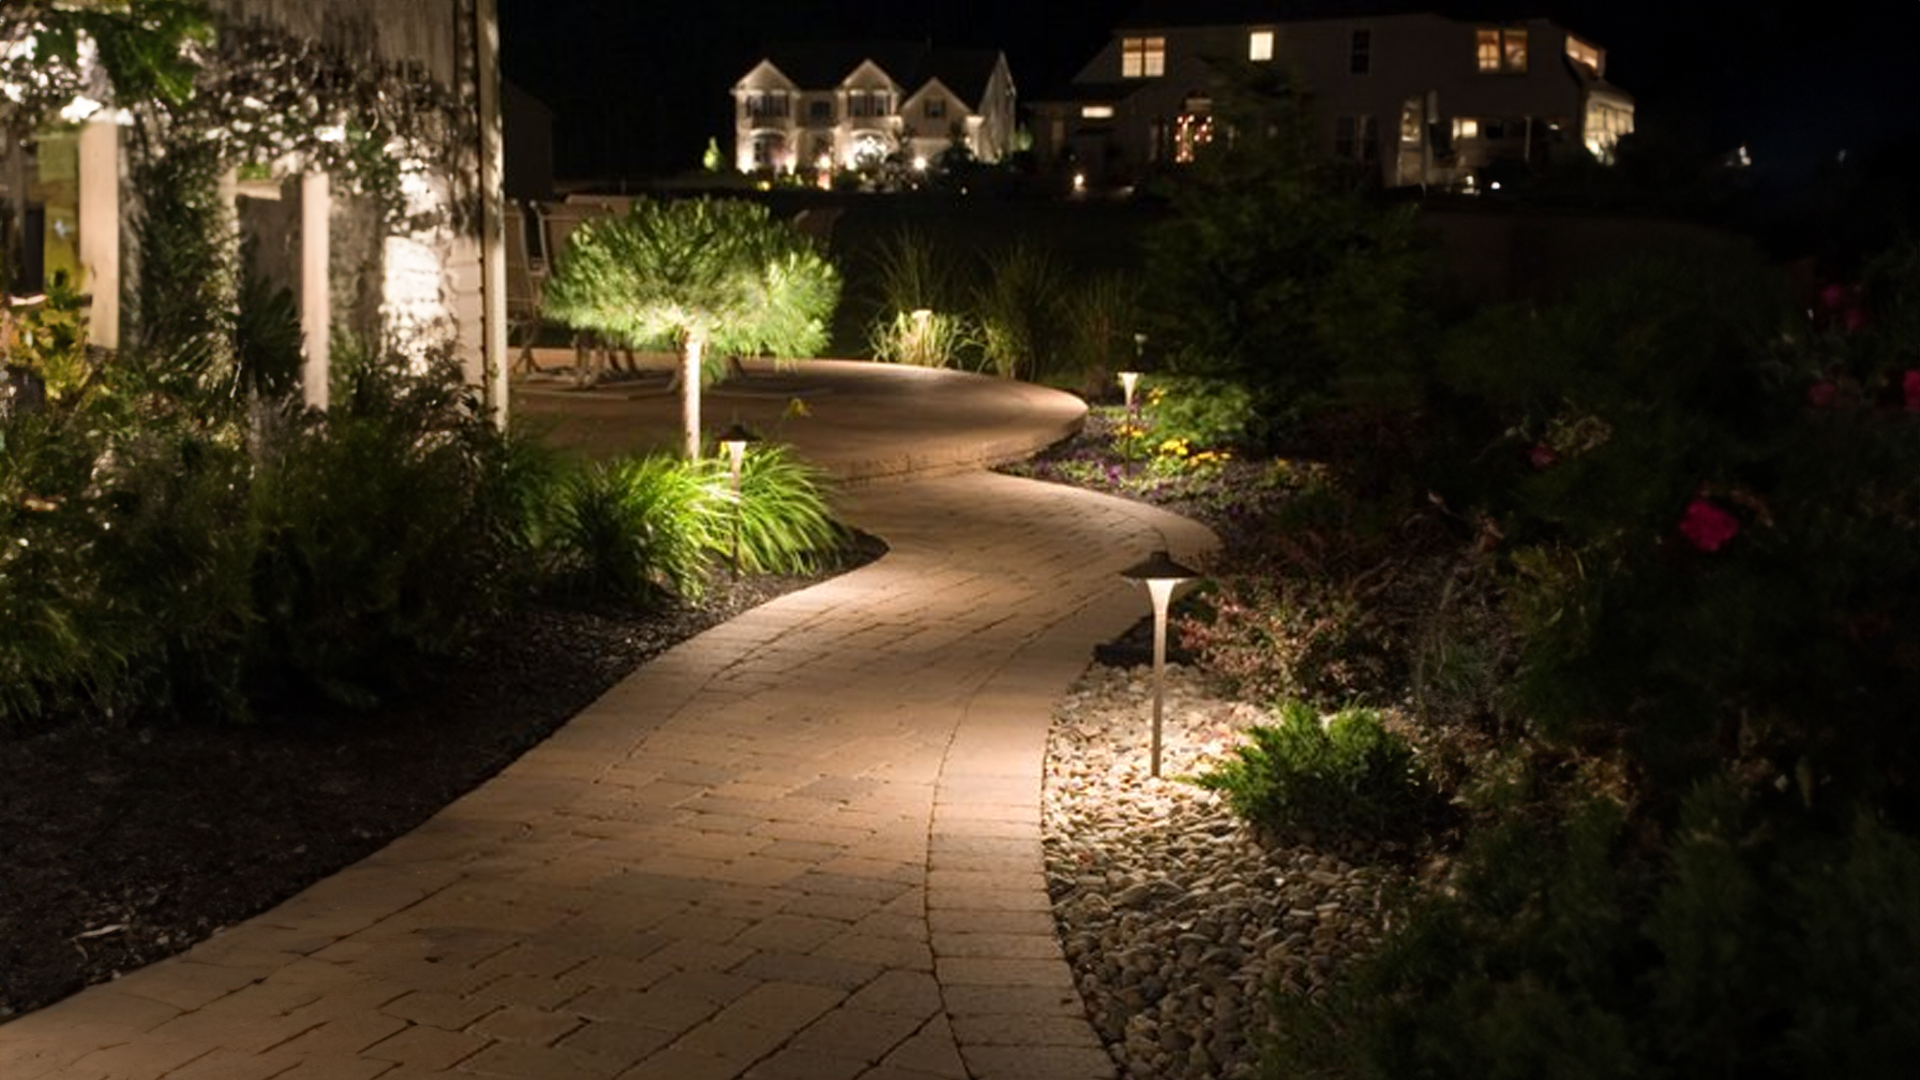 This Is The Best Wattage For Outdoor Lights Around Homes